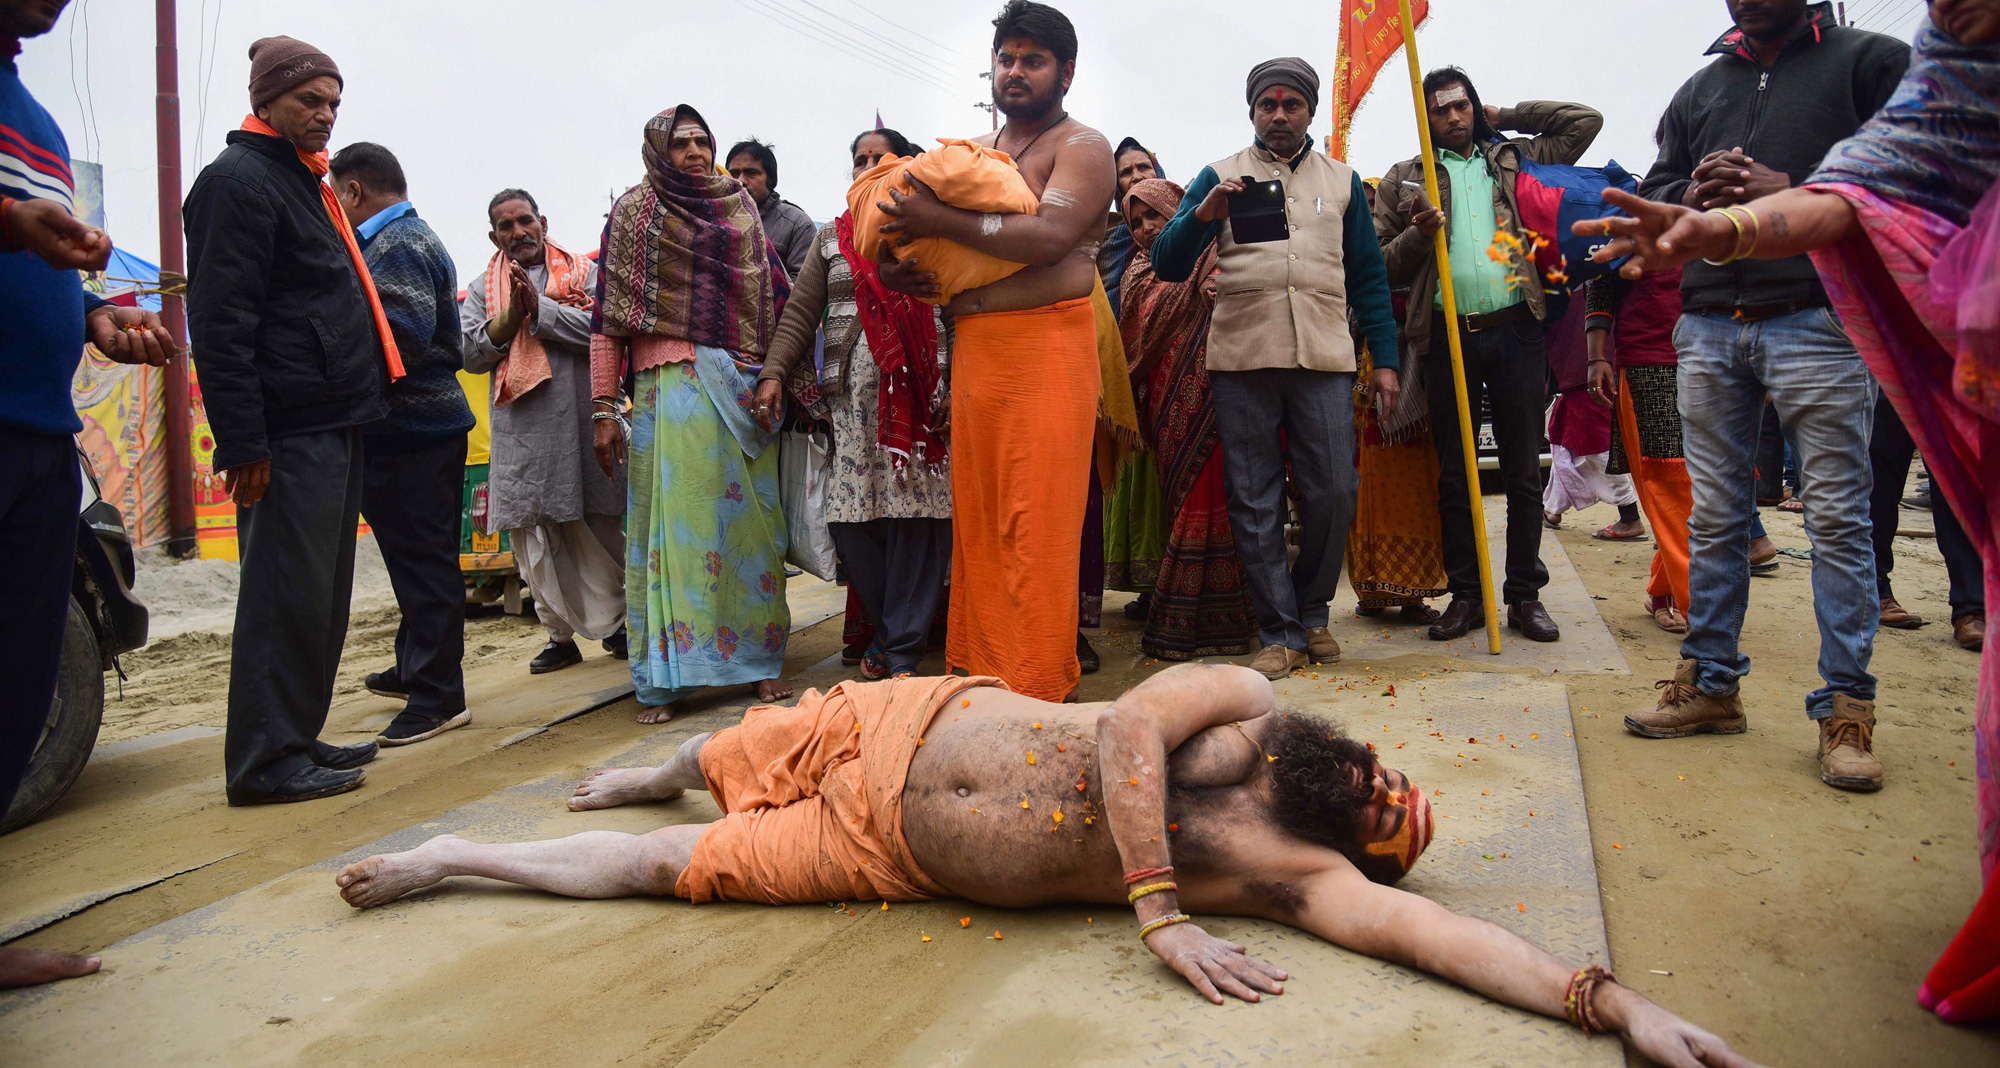 A sadhu rolls on the road as an appeal to build the Ram temple in Ayodhya, during the Kumbh Mela in Allahabad on Sunday, January 27.